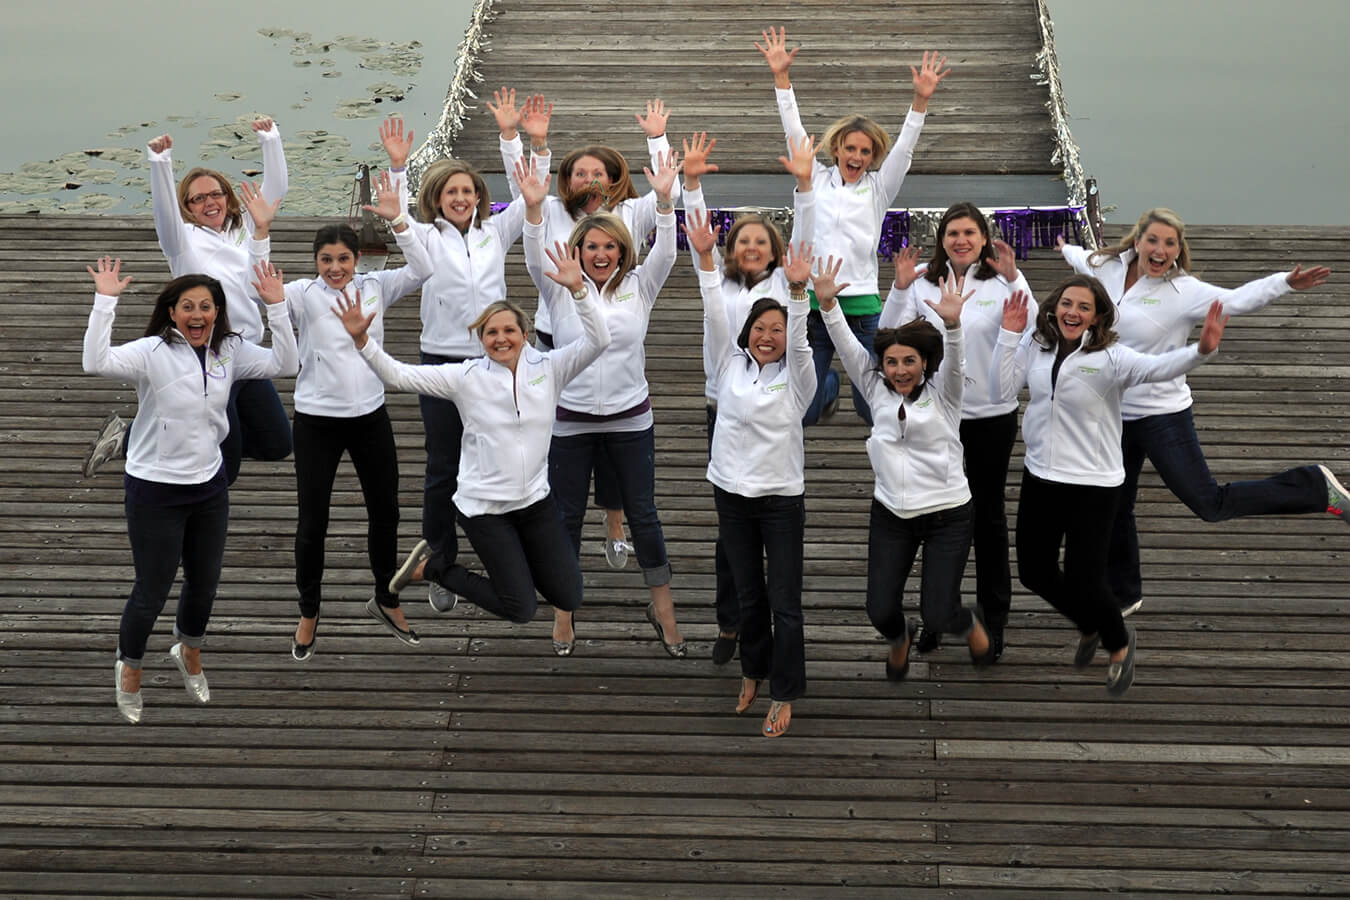 Women in white jackets jumping and smiling